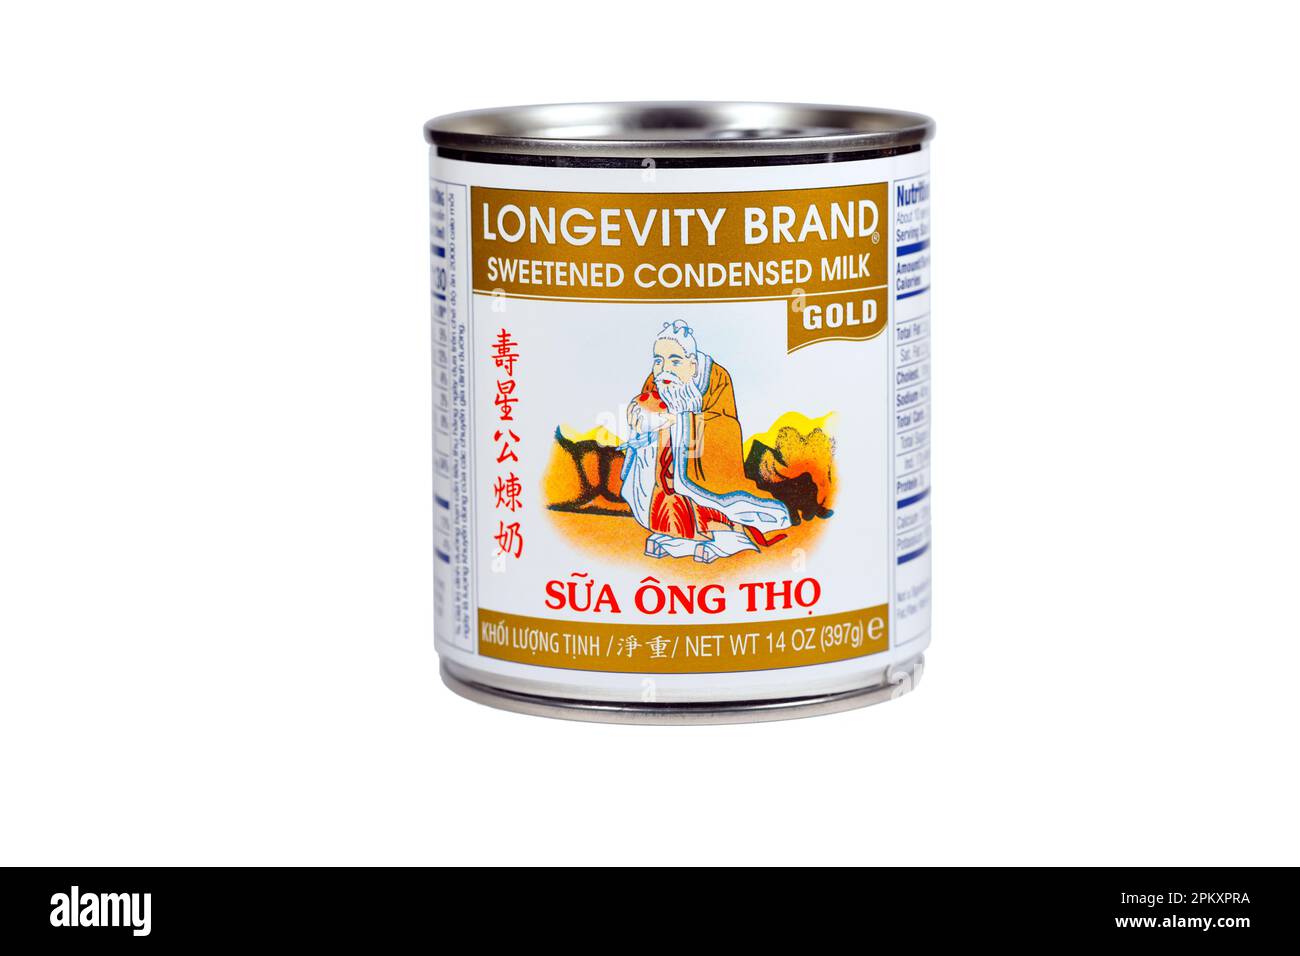 Longevity Brand Gold Label Sweetened Condensed Milk, Sữa Ông Thọ, isolated on a white background. cutout image for illustration and editorial use. Stock Photo